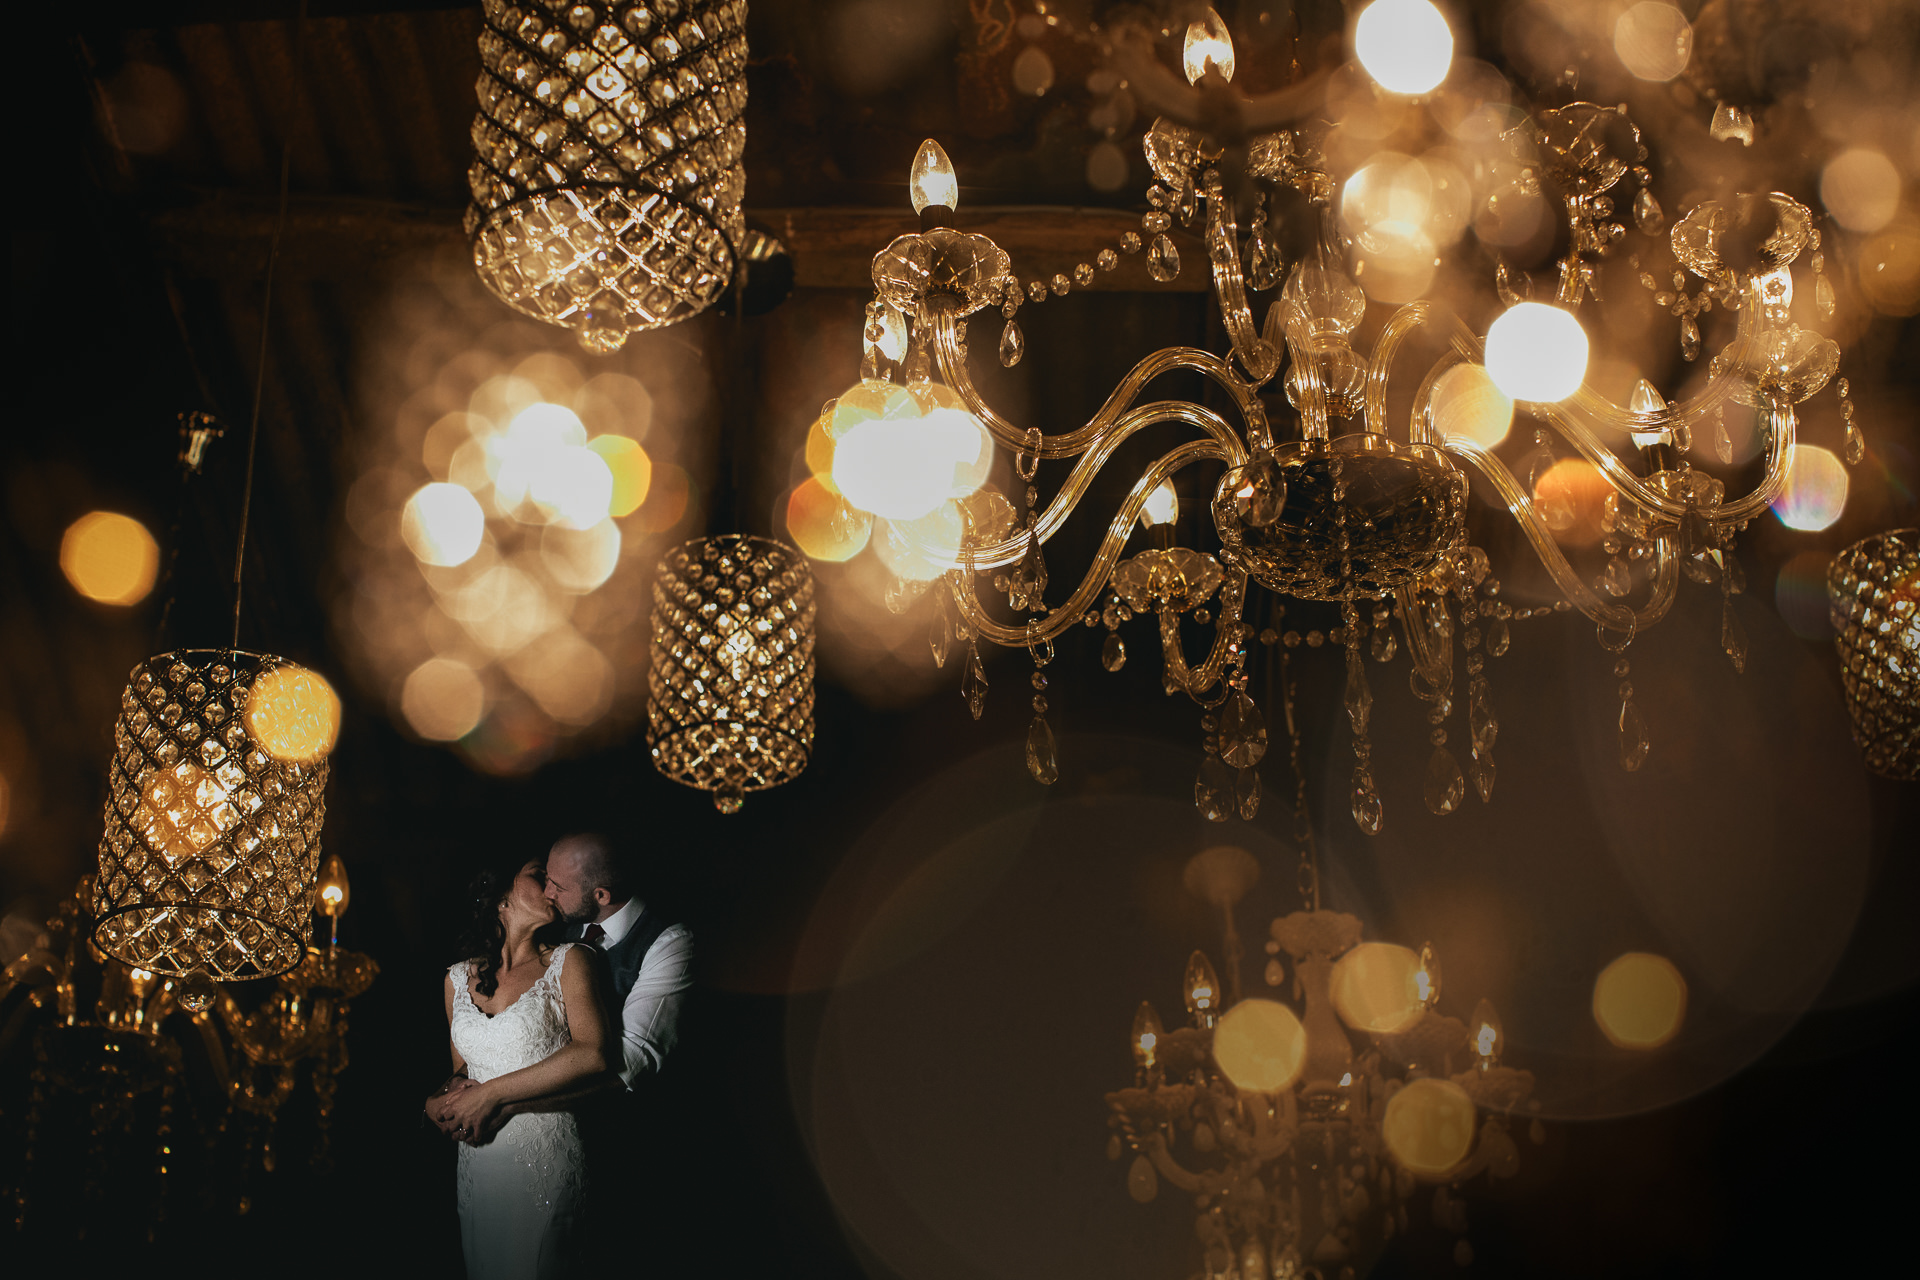 Bride and groom in room with multiple decorative lanterns